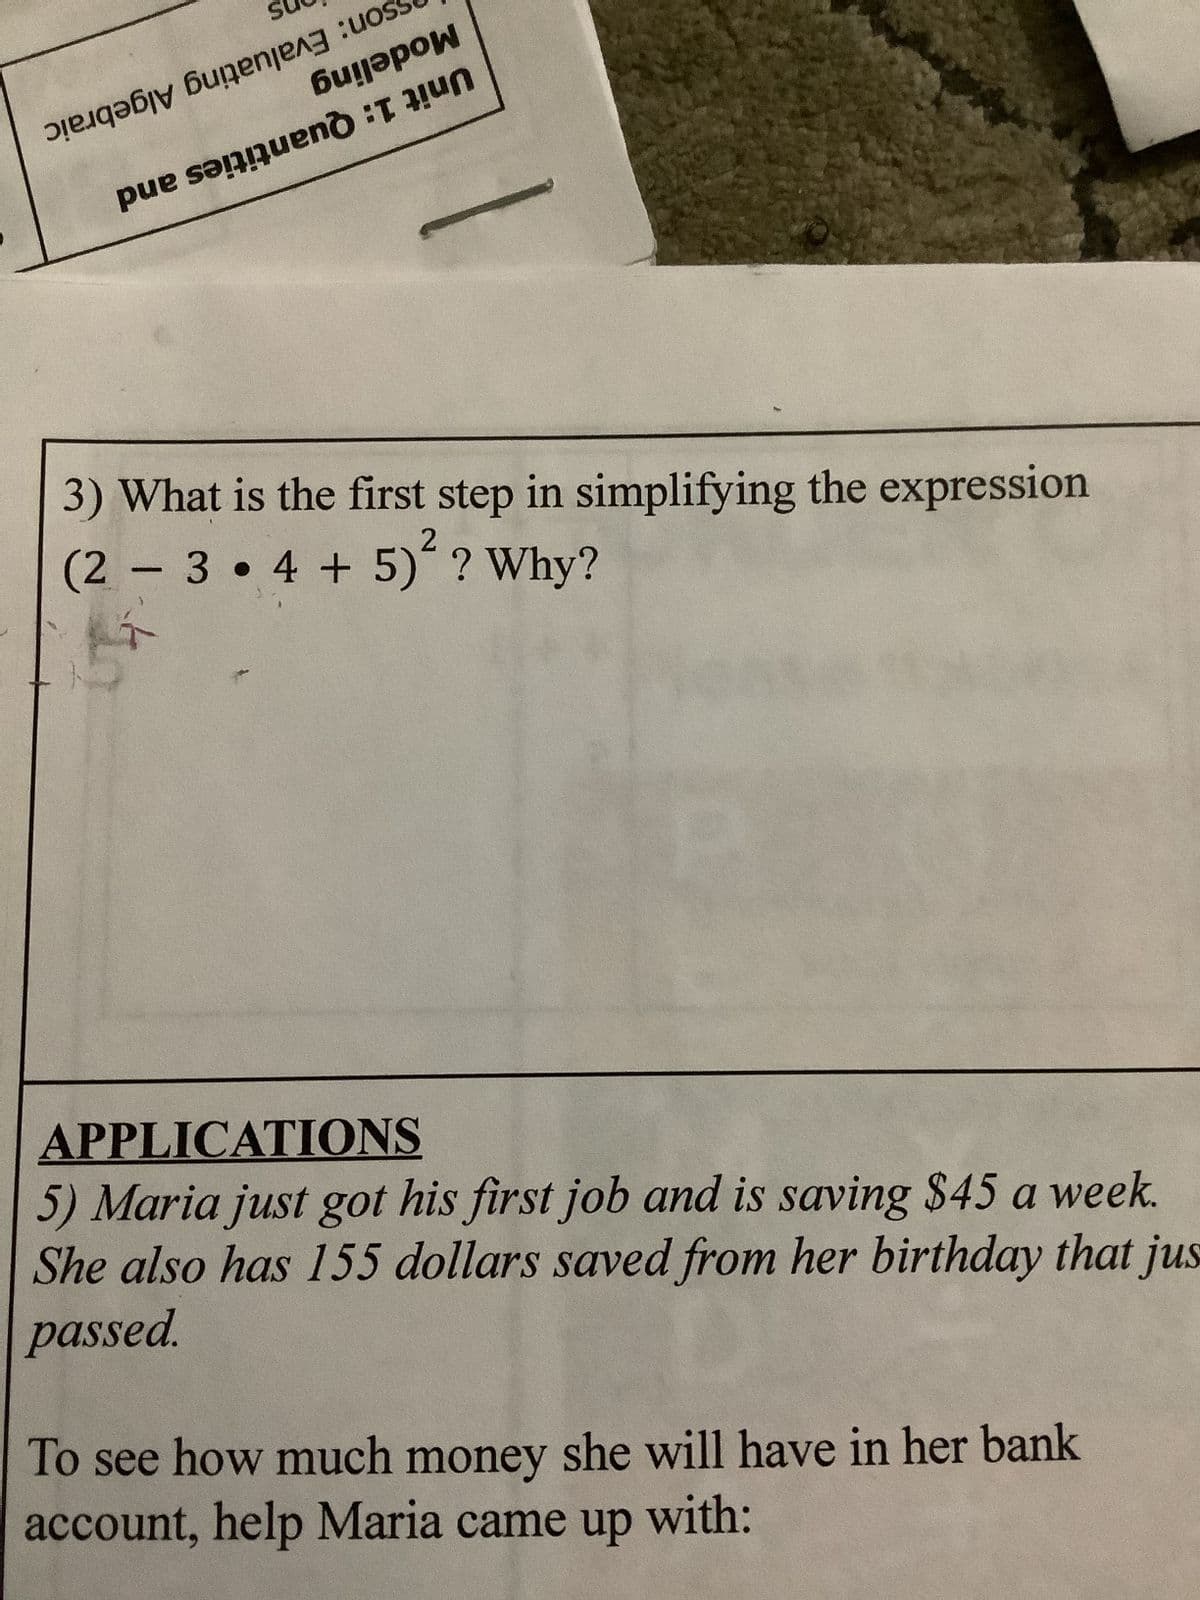 е дәбју бидеnje^3 :uos
би!әрои
pe sangen
3) What is the first step in simplifying the expression
2
(2 3
4 + 5) ? Why?
-
APPLICATIONS
5) Maria just got his first job and is saving $45 a week.
She also has 155 dollars saved from her birthday that jus
passed.
To see how much money she will have in her bank
account, help Maria came up with: